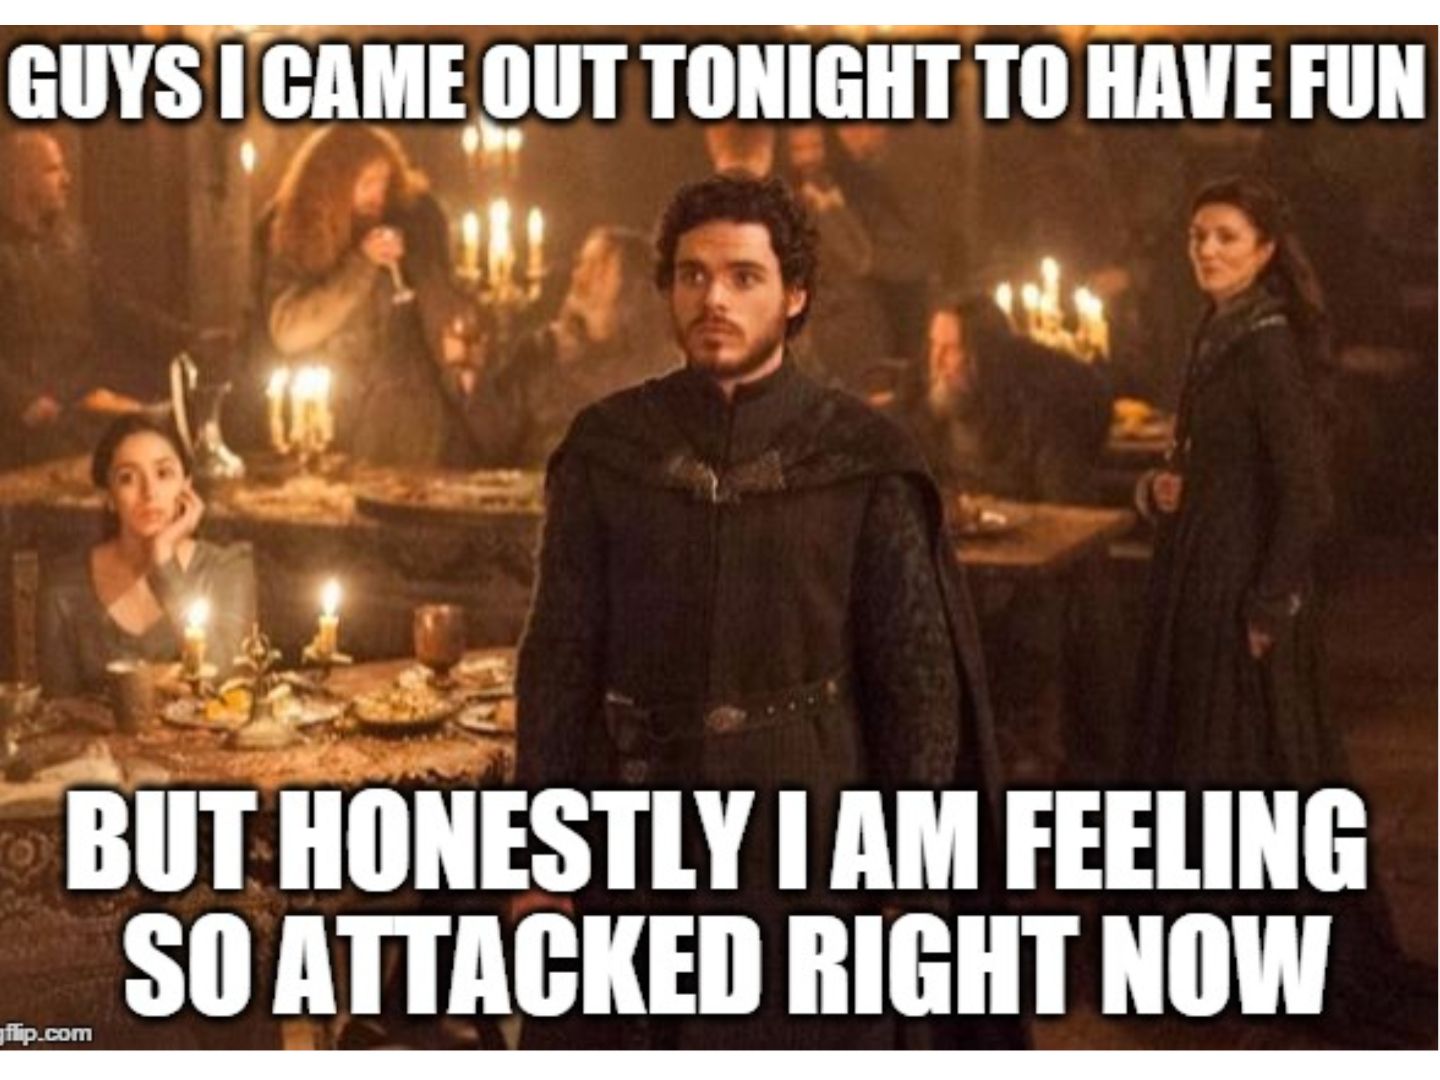 Meme about the Red Wedding in Game Of Thrones. 